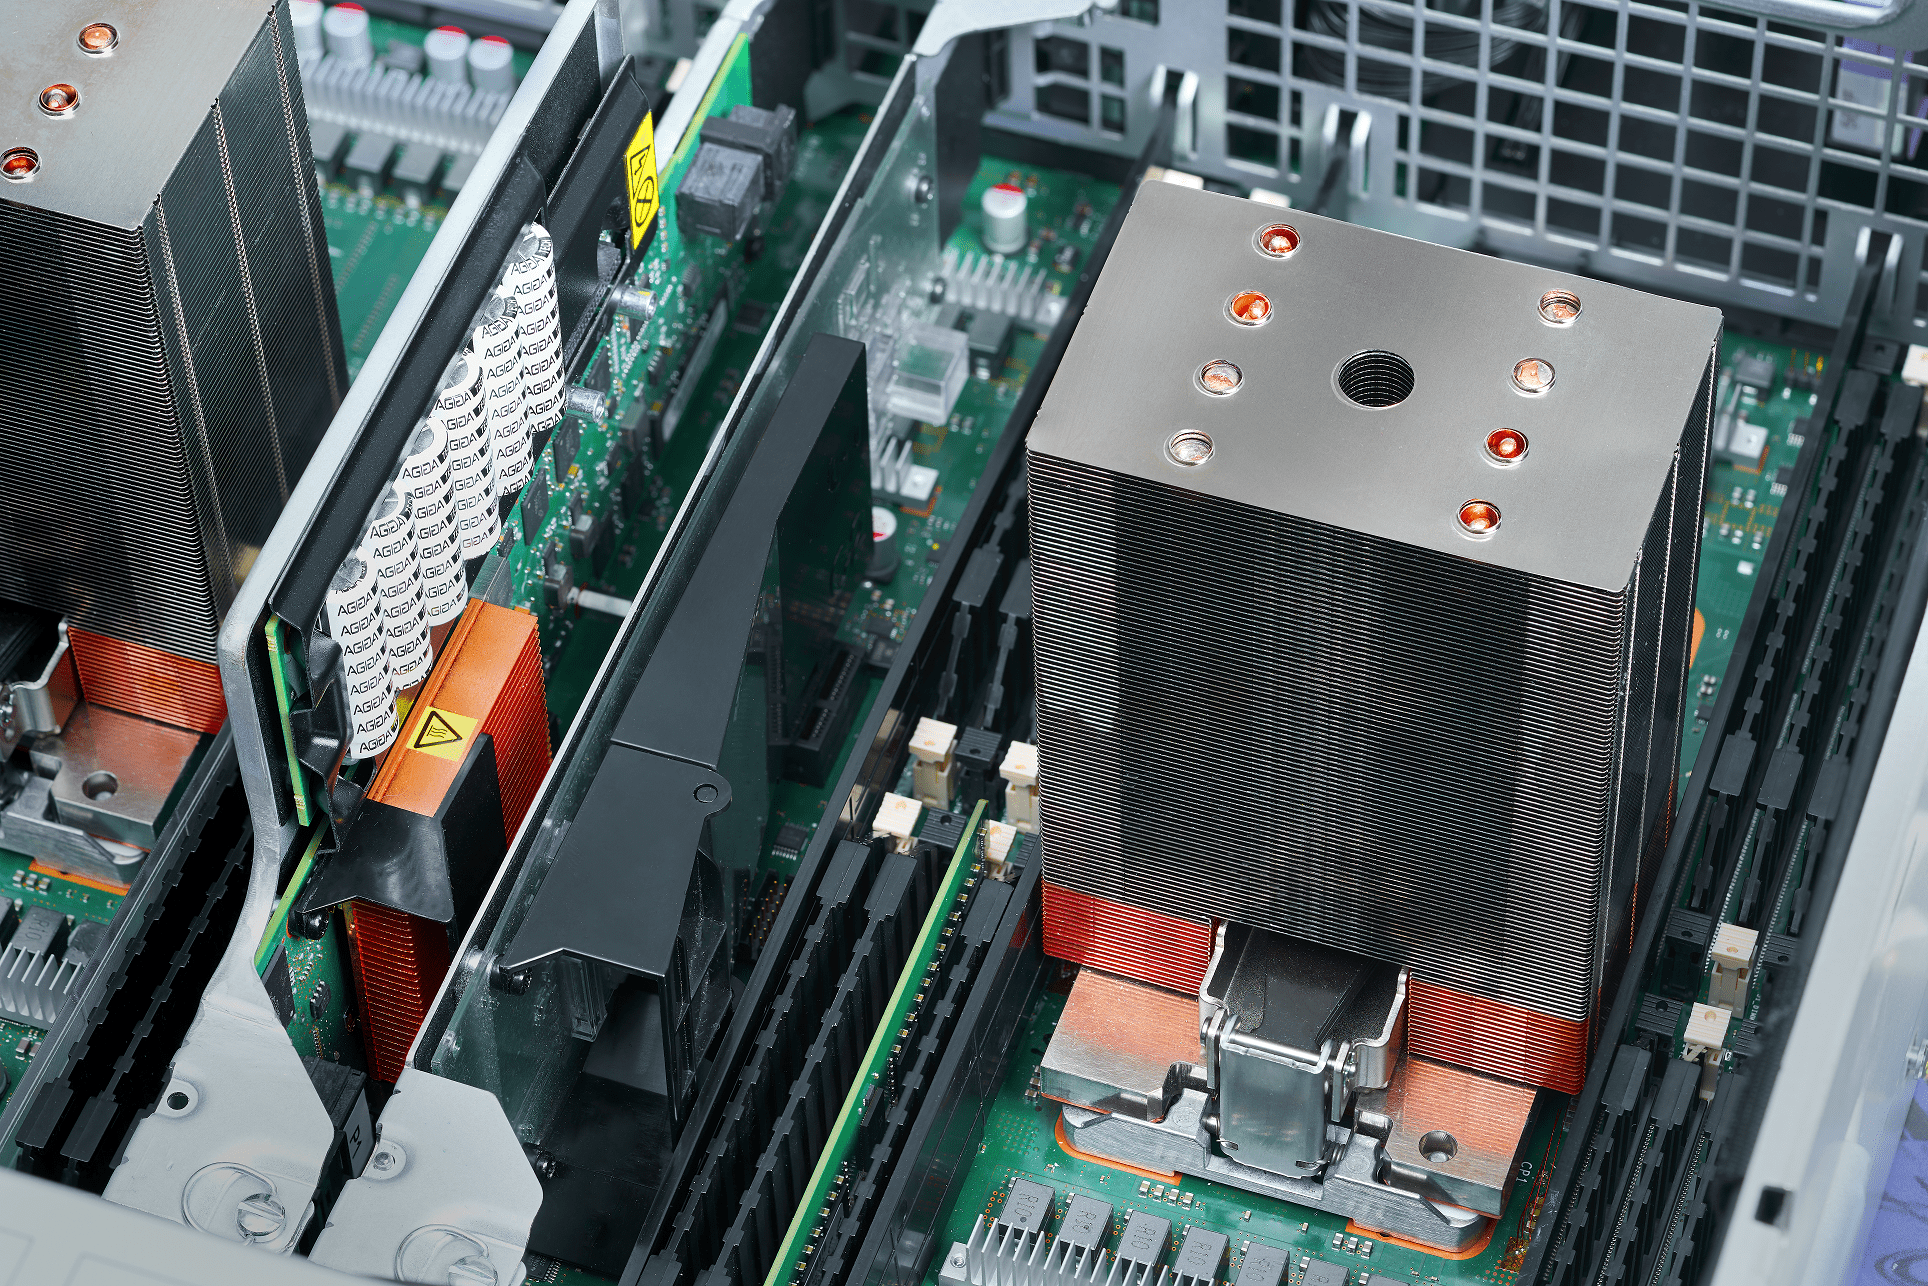 POWER9 in 2020: What's Coming Ahead - Used IBM Servers, New Power 10  Systems